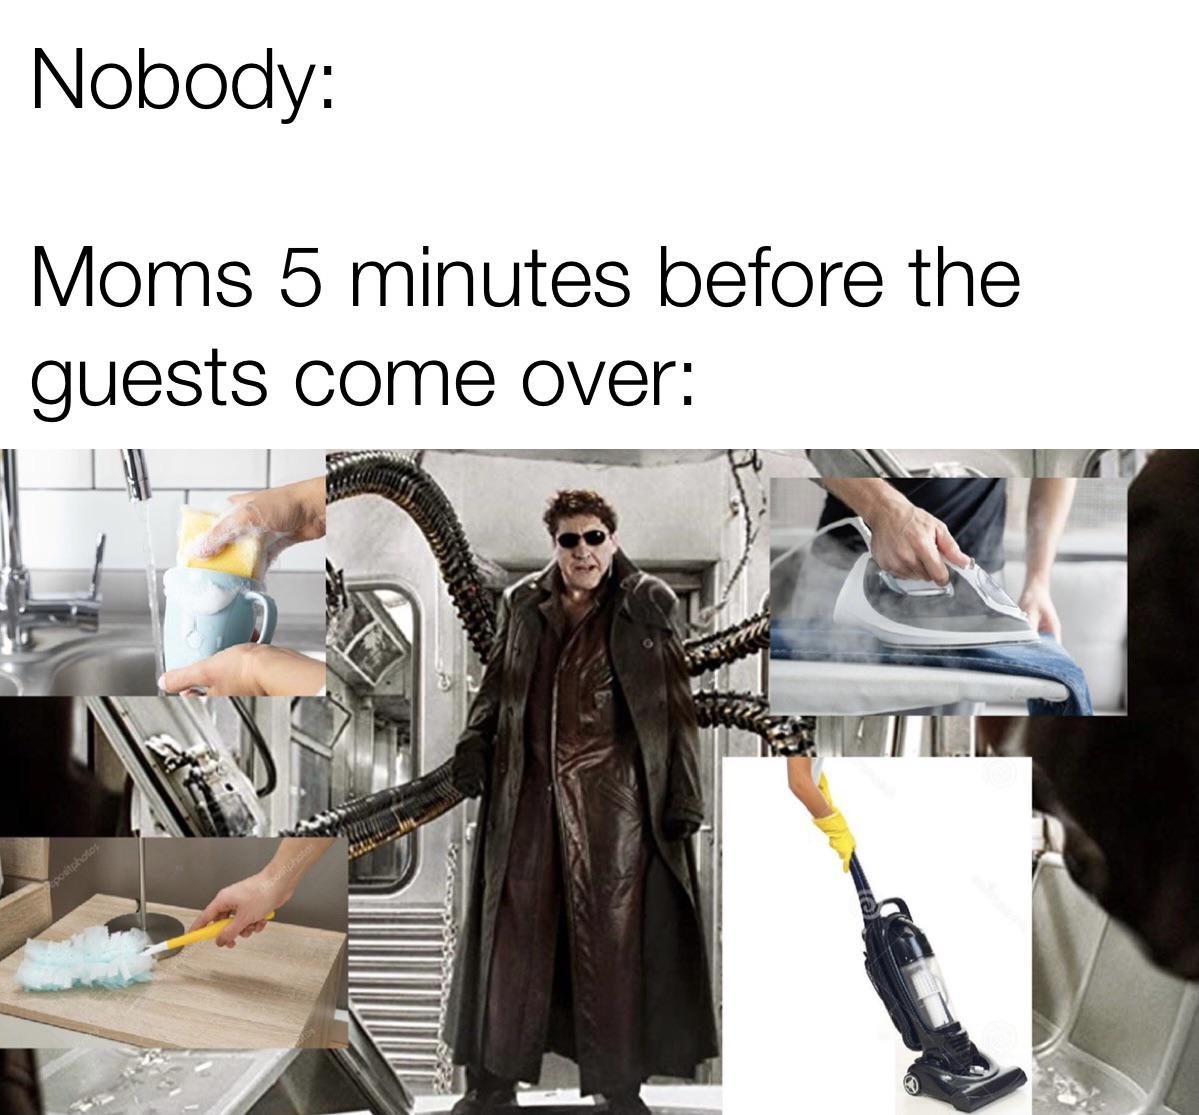 dank memes - bath and body works - Nobody Moms 5 minutes before the guests come over postos